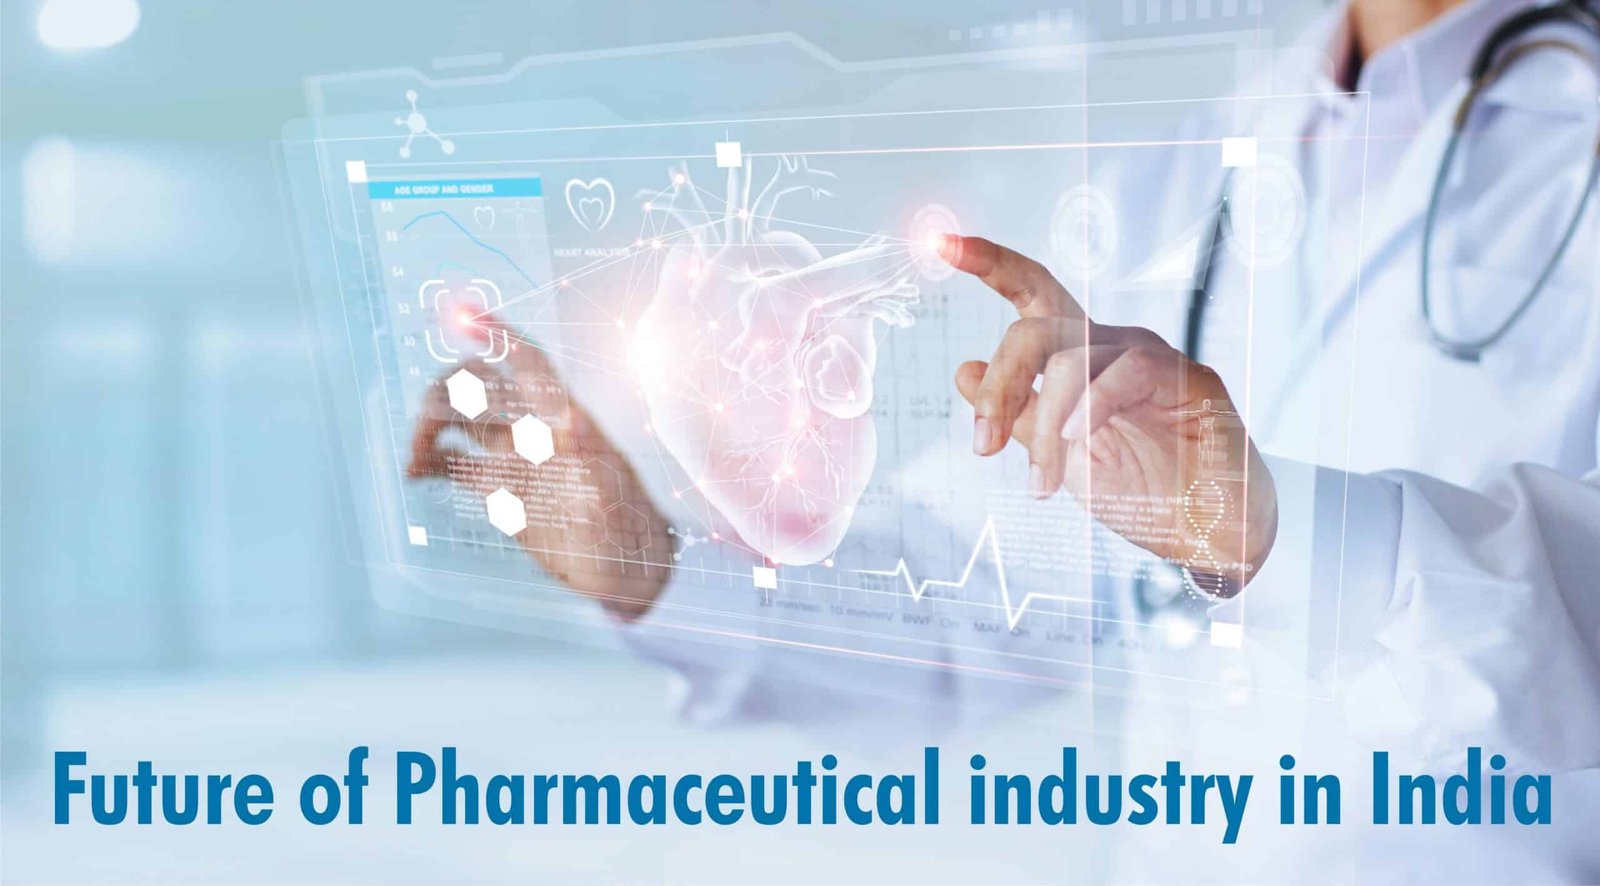 Prospects for the Pharmaceutical industry in India